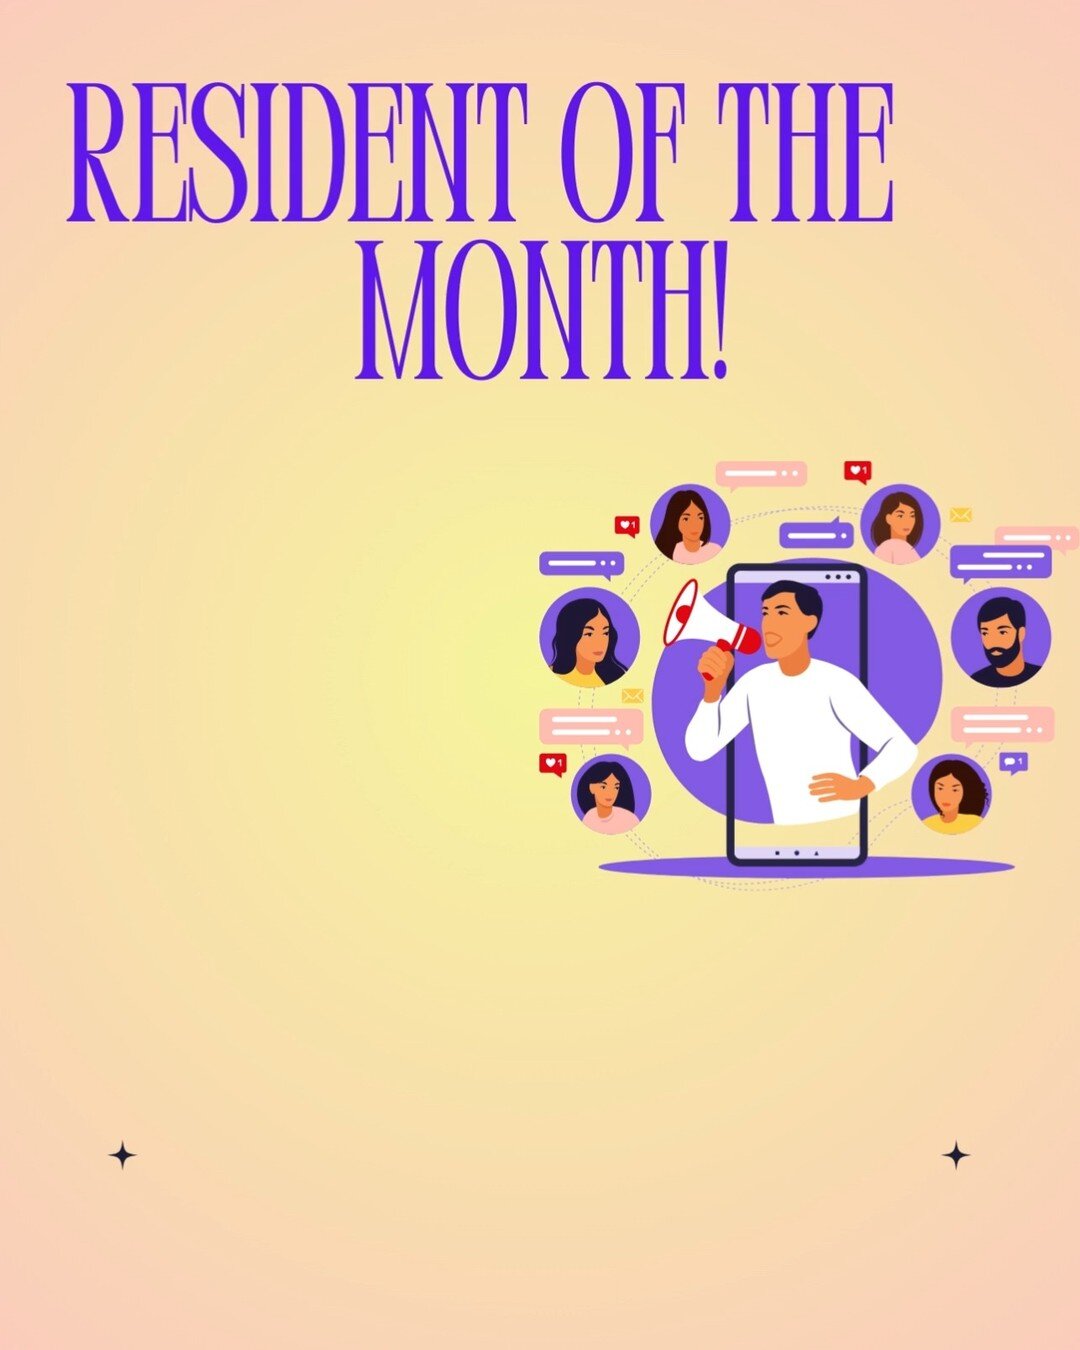 Does a neighbor always give you a smile and ask you about your day? Does your roommate go above and beyond with chores in your home? We want to hear ALL about it from you to make them feel special!

We are doing a resident of the month for November a